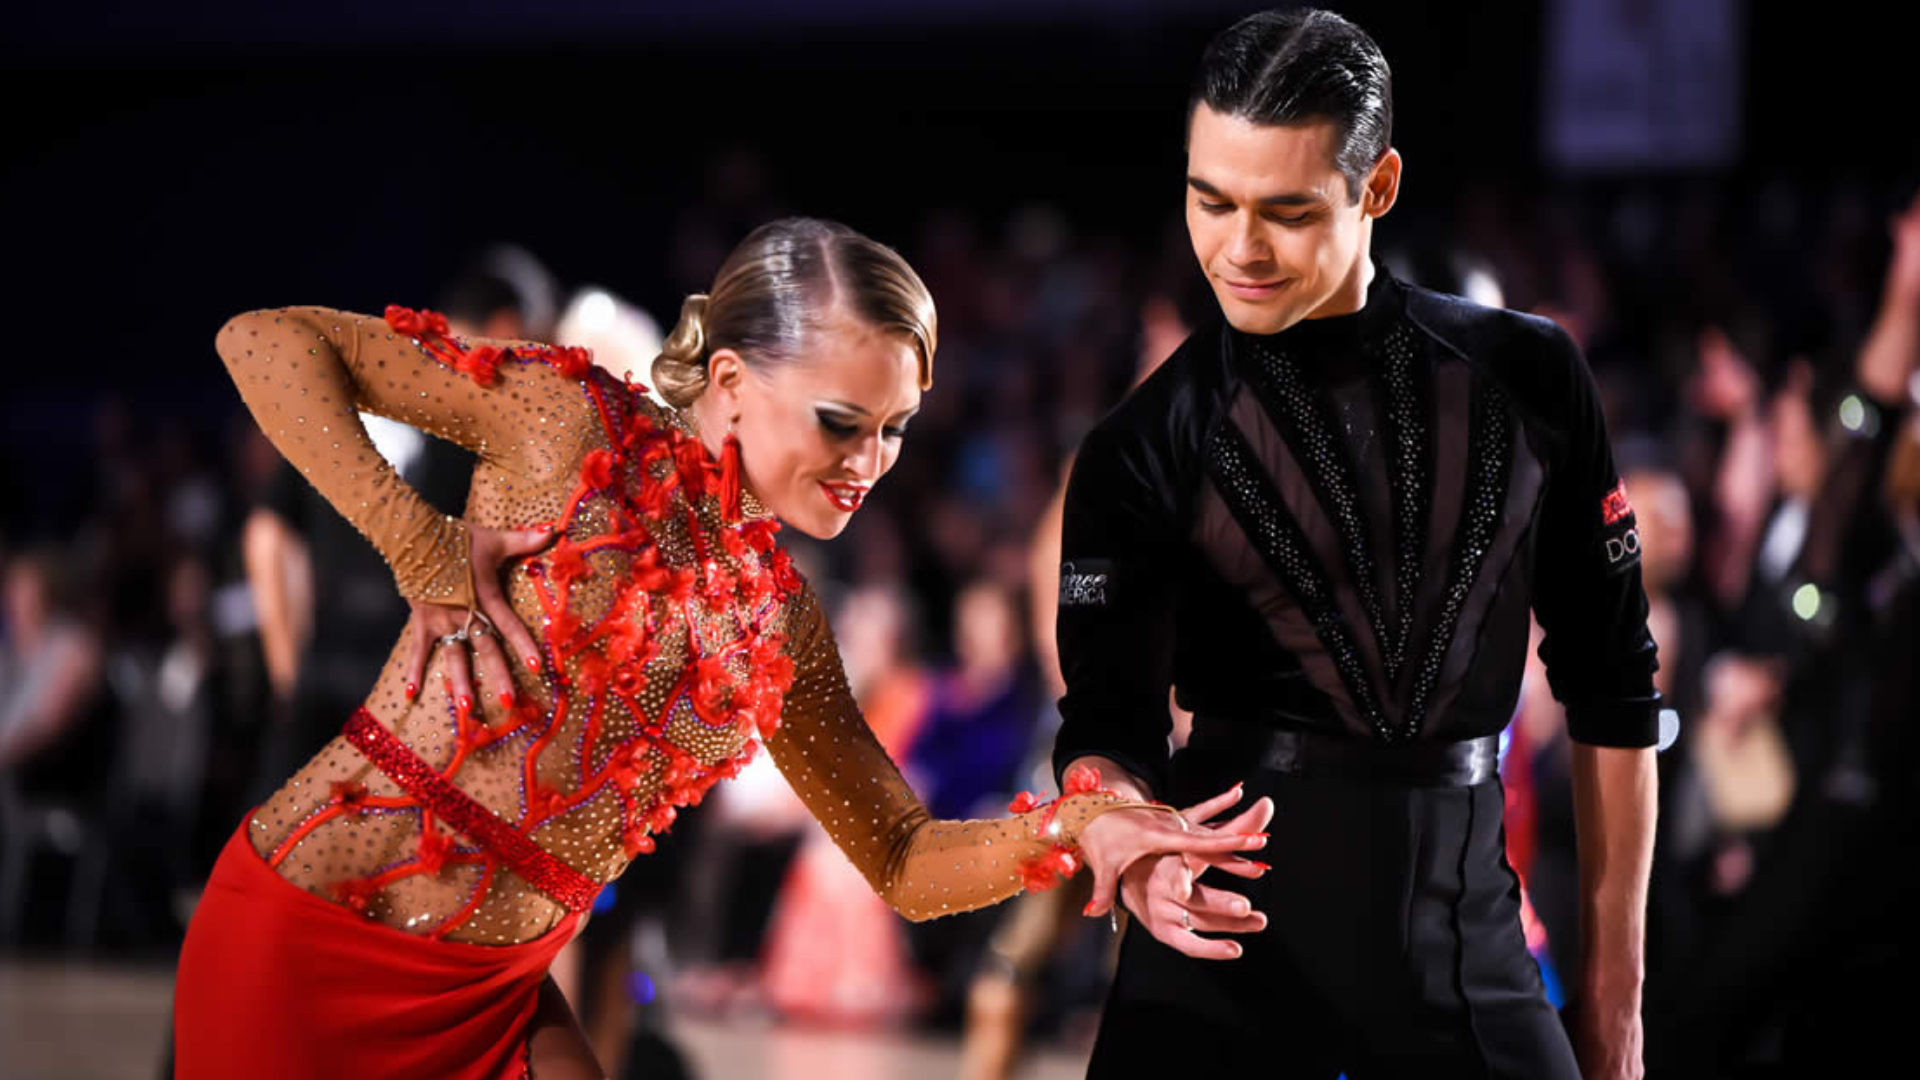 Image for the blog: The Physical, Mental, and Social Benefits of Ballroom Dancing